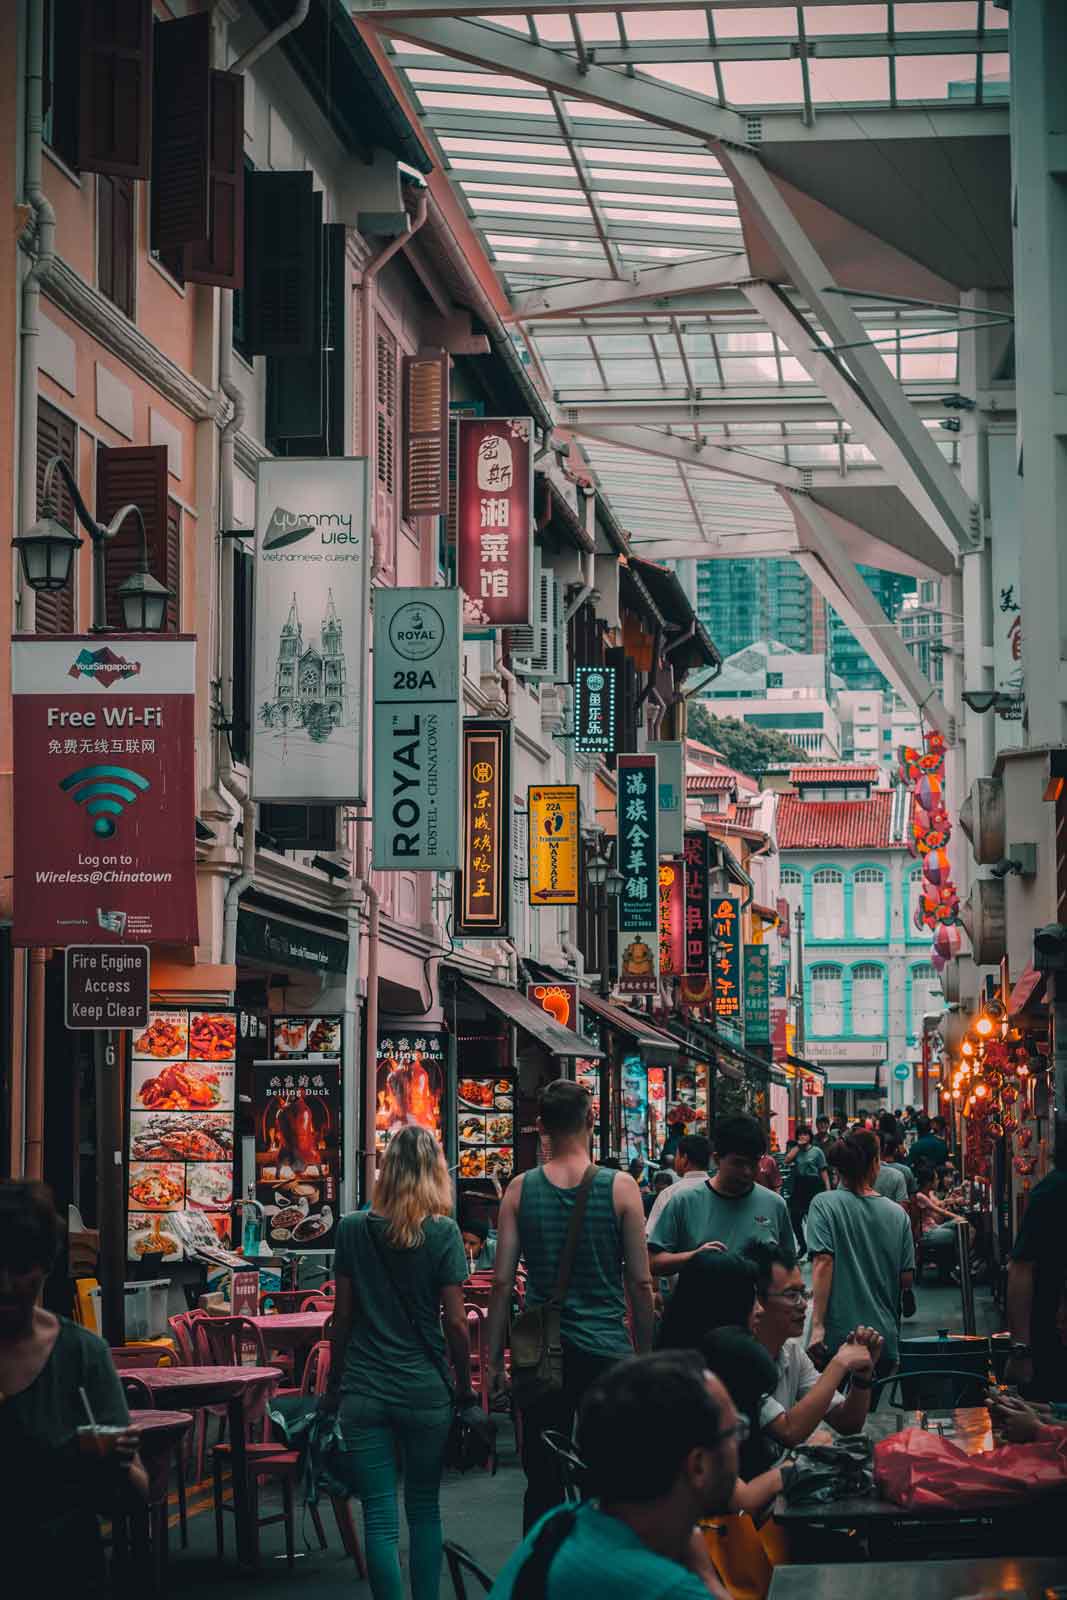 A Street shot of Chinatown in Singapore